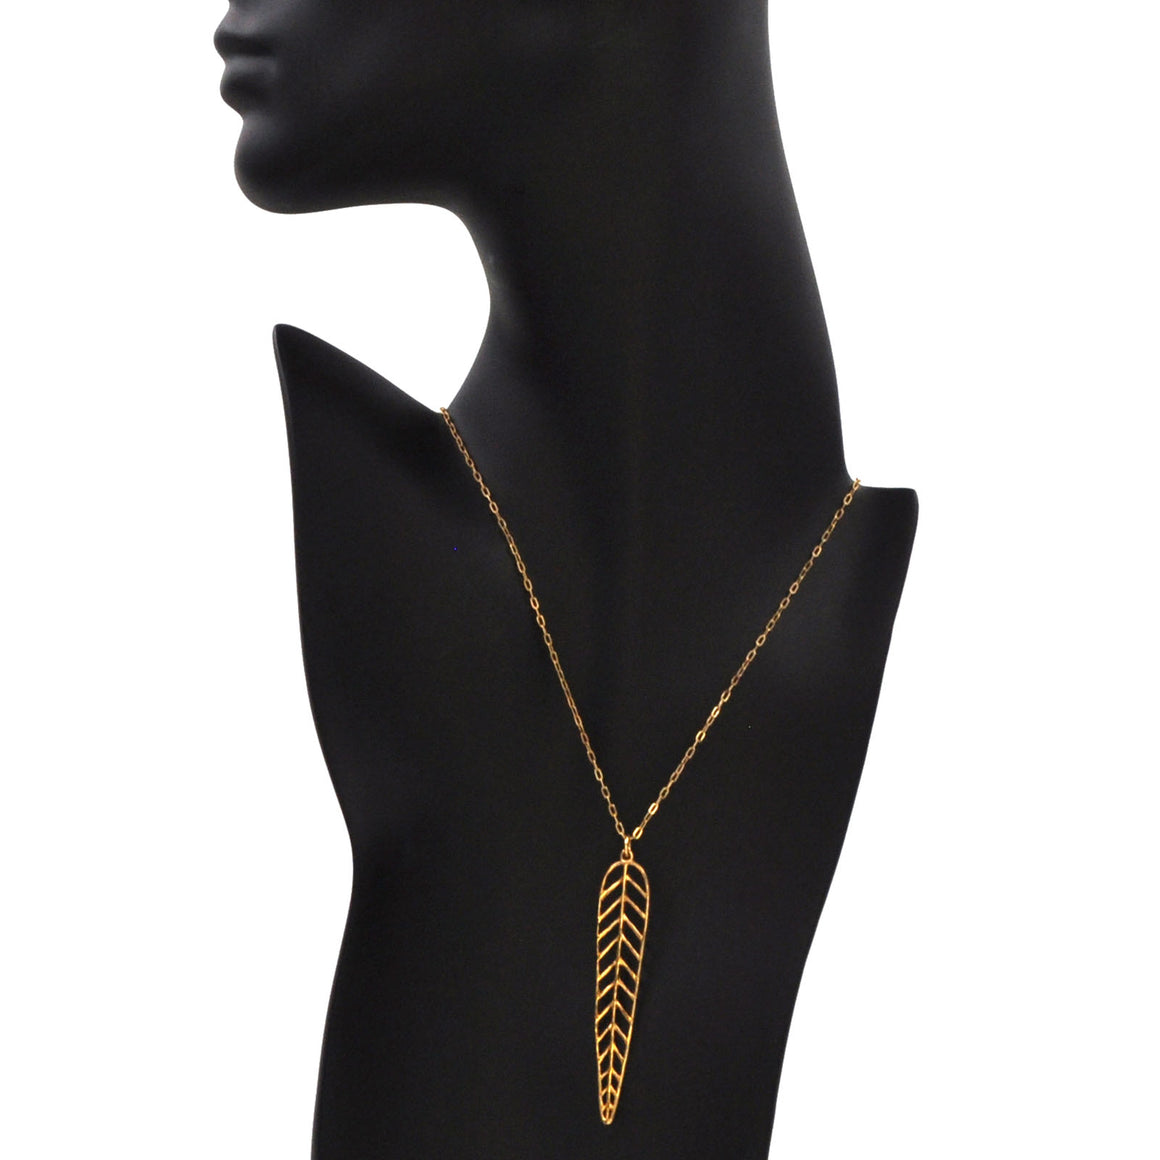 Chevron Leaf Necklace - 24K Gold Plated